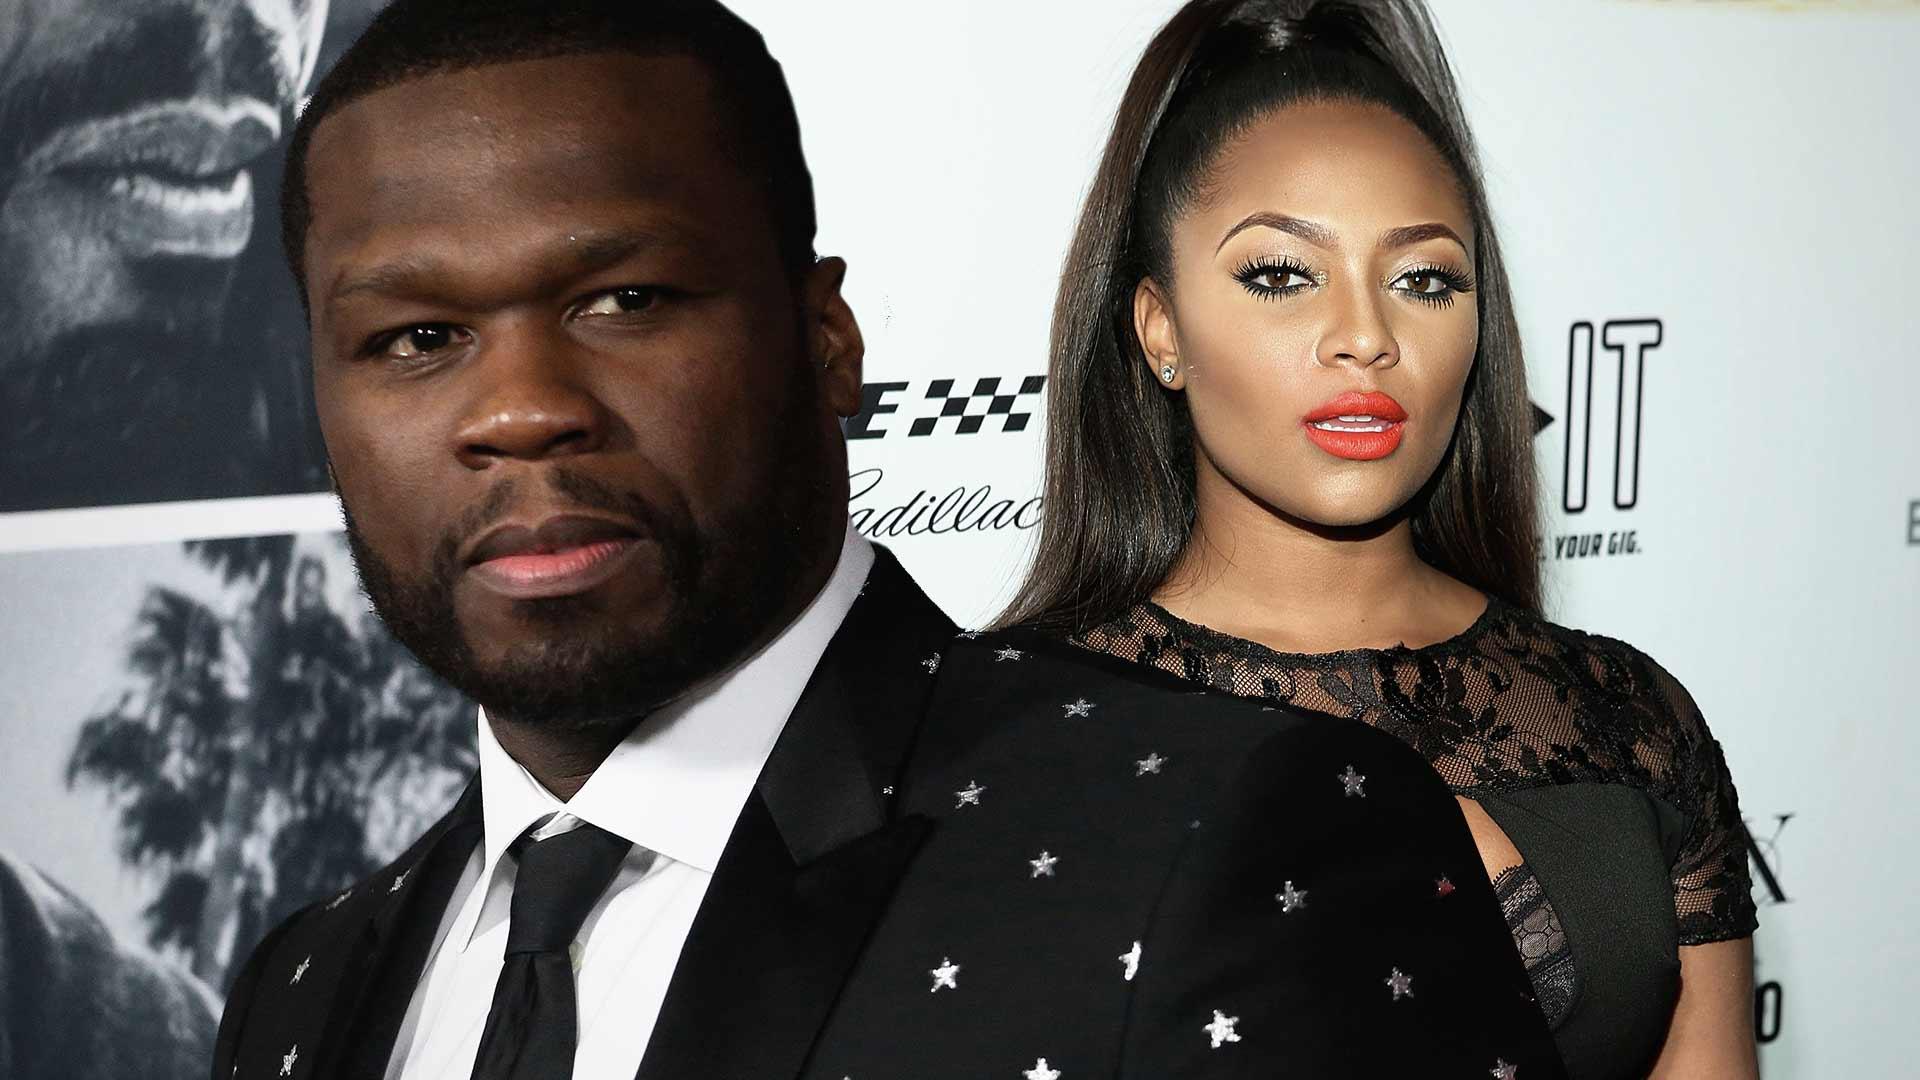 50 Cent Suggests Teairra Marí Lied About Her Grandpa’s Funeral to Avoid Paying Up